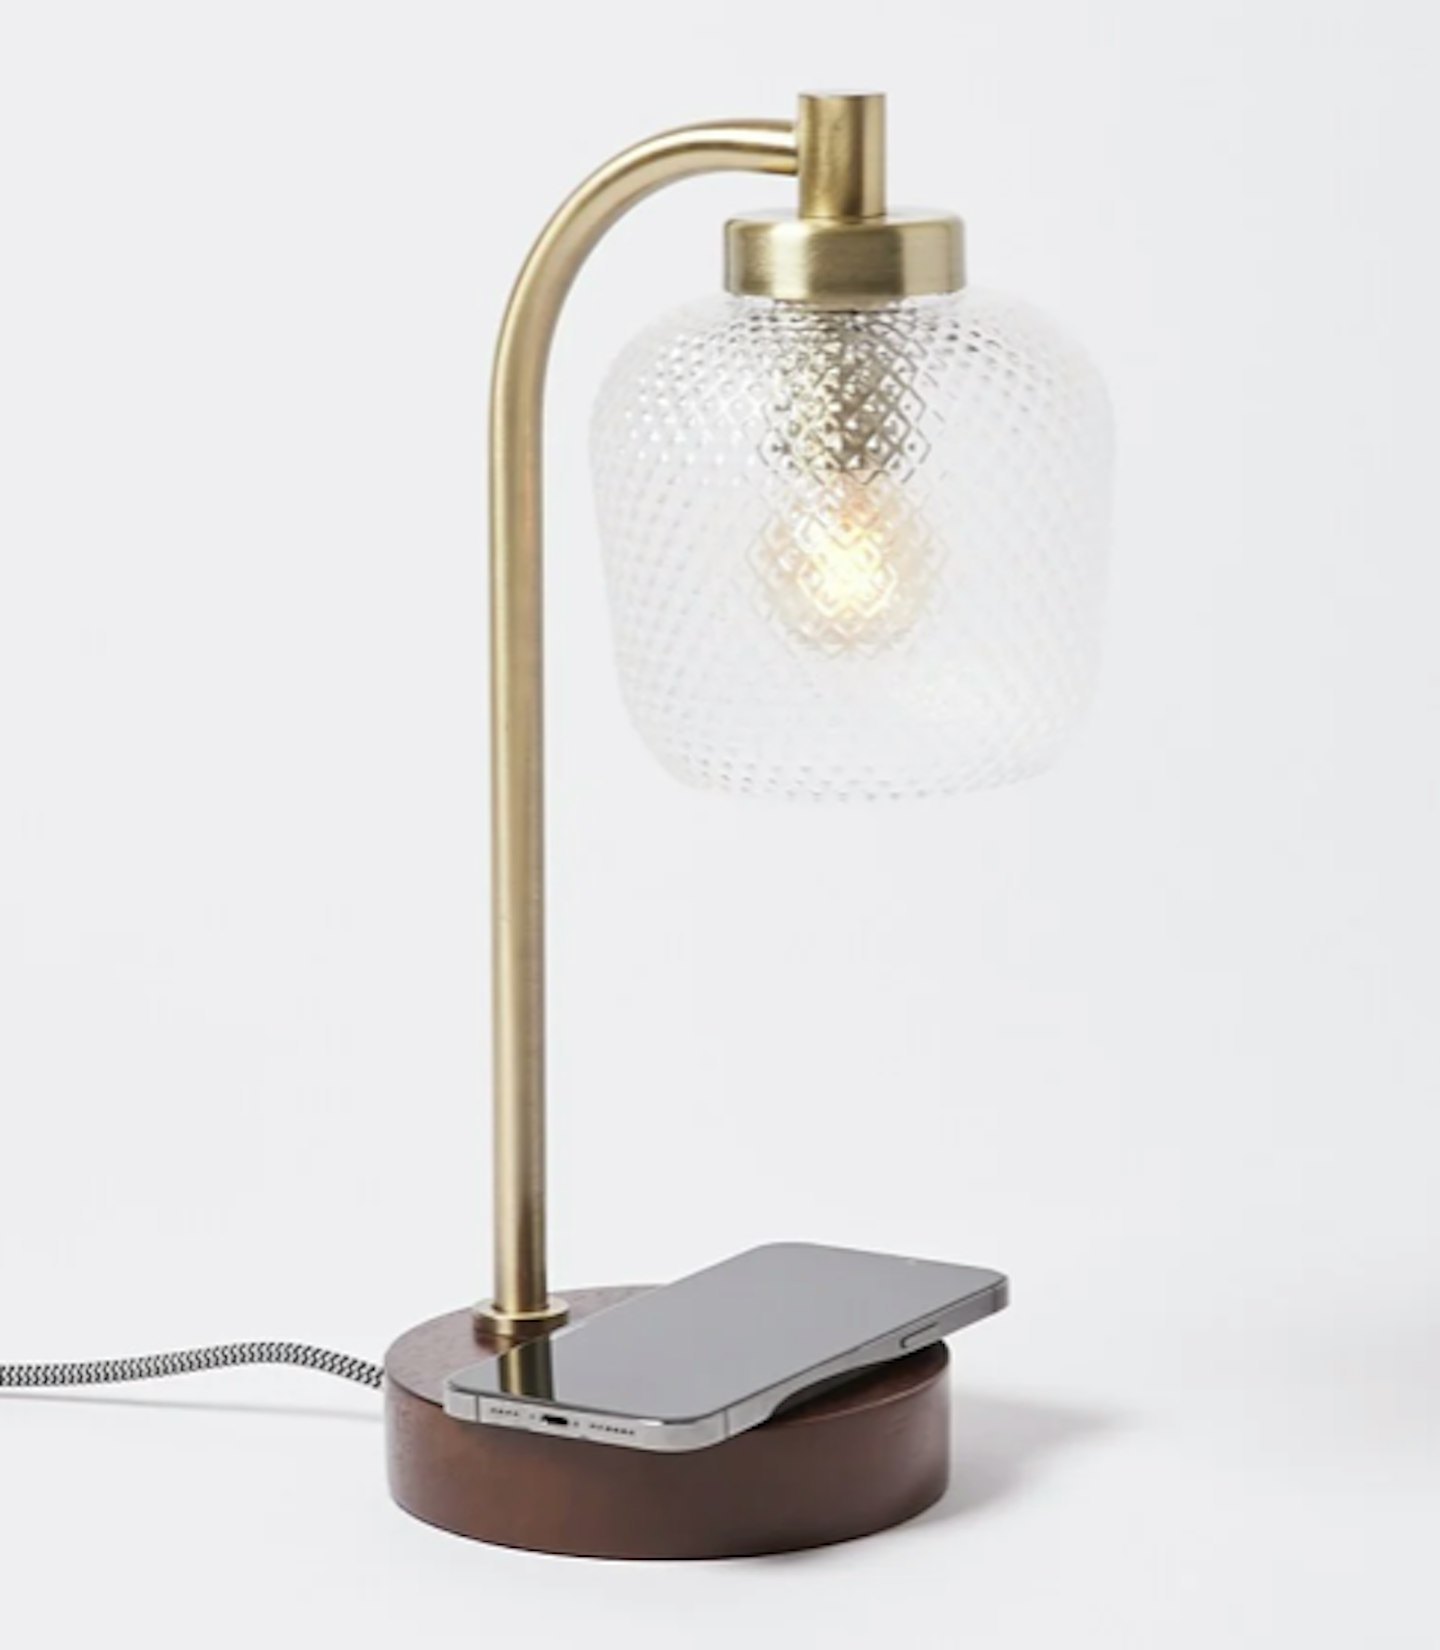 Oliver Bonas, Luce Gold Glass & Wood Wireless Charging Desk & Table Lamp, WAS £115 NOW £78